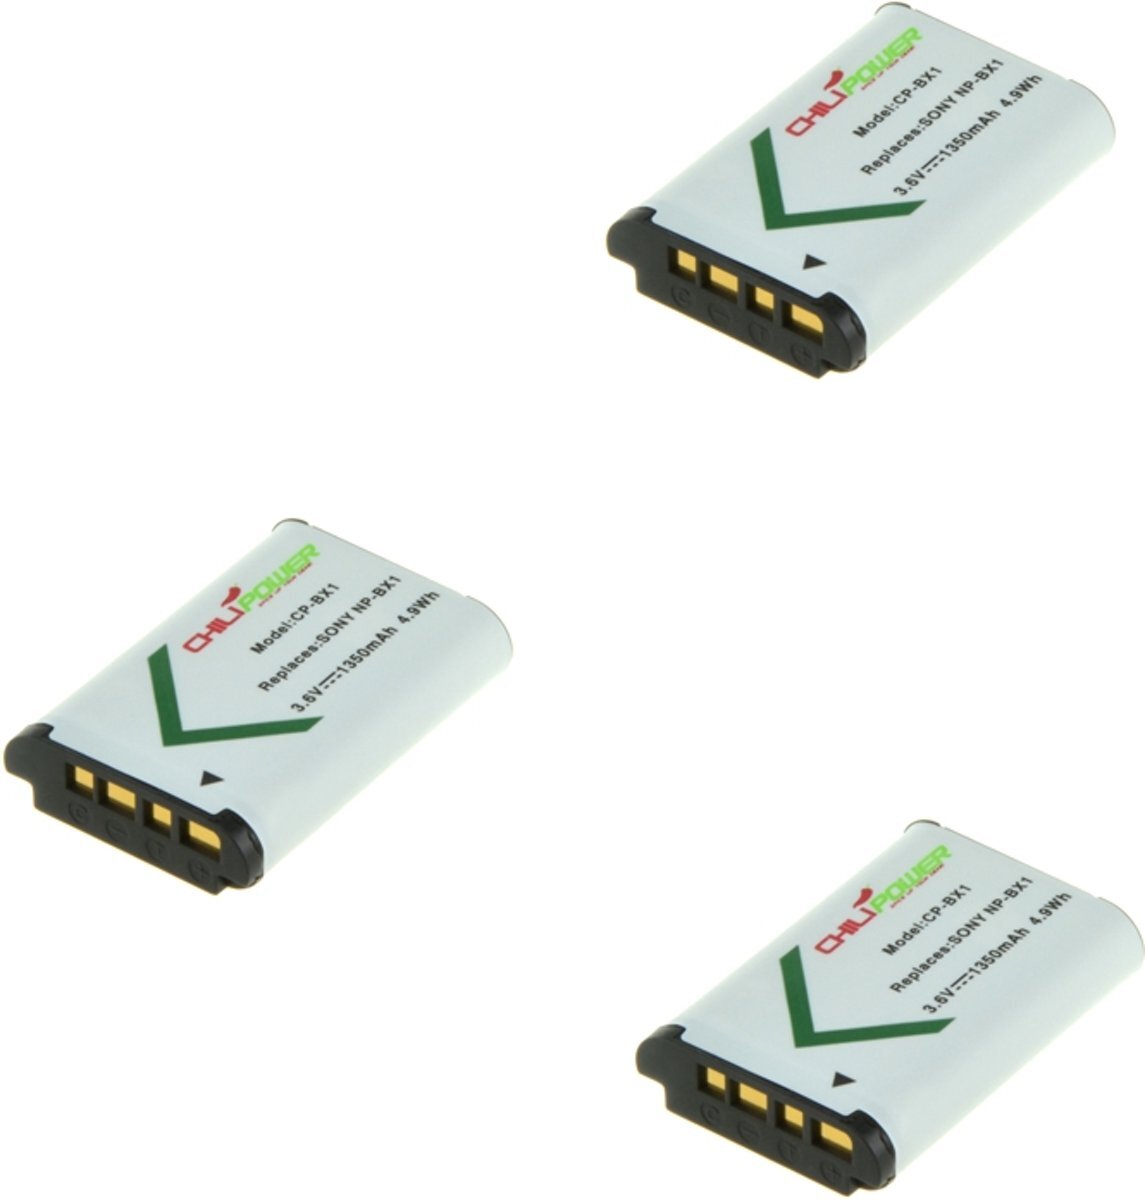 ChiliPower NP-BX1 accu voor Sony - 1350mAh - 3-Pack NP-BX1 accu voor Sony - 1350mAh - 3-Pack